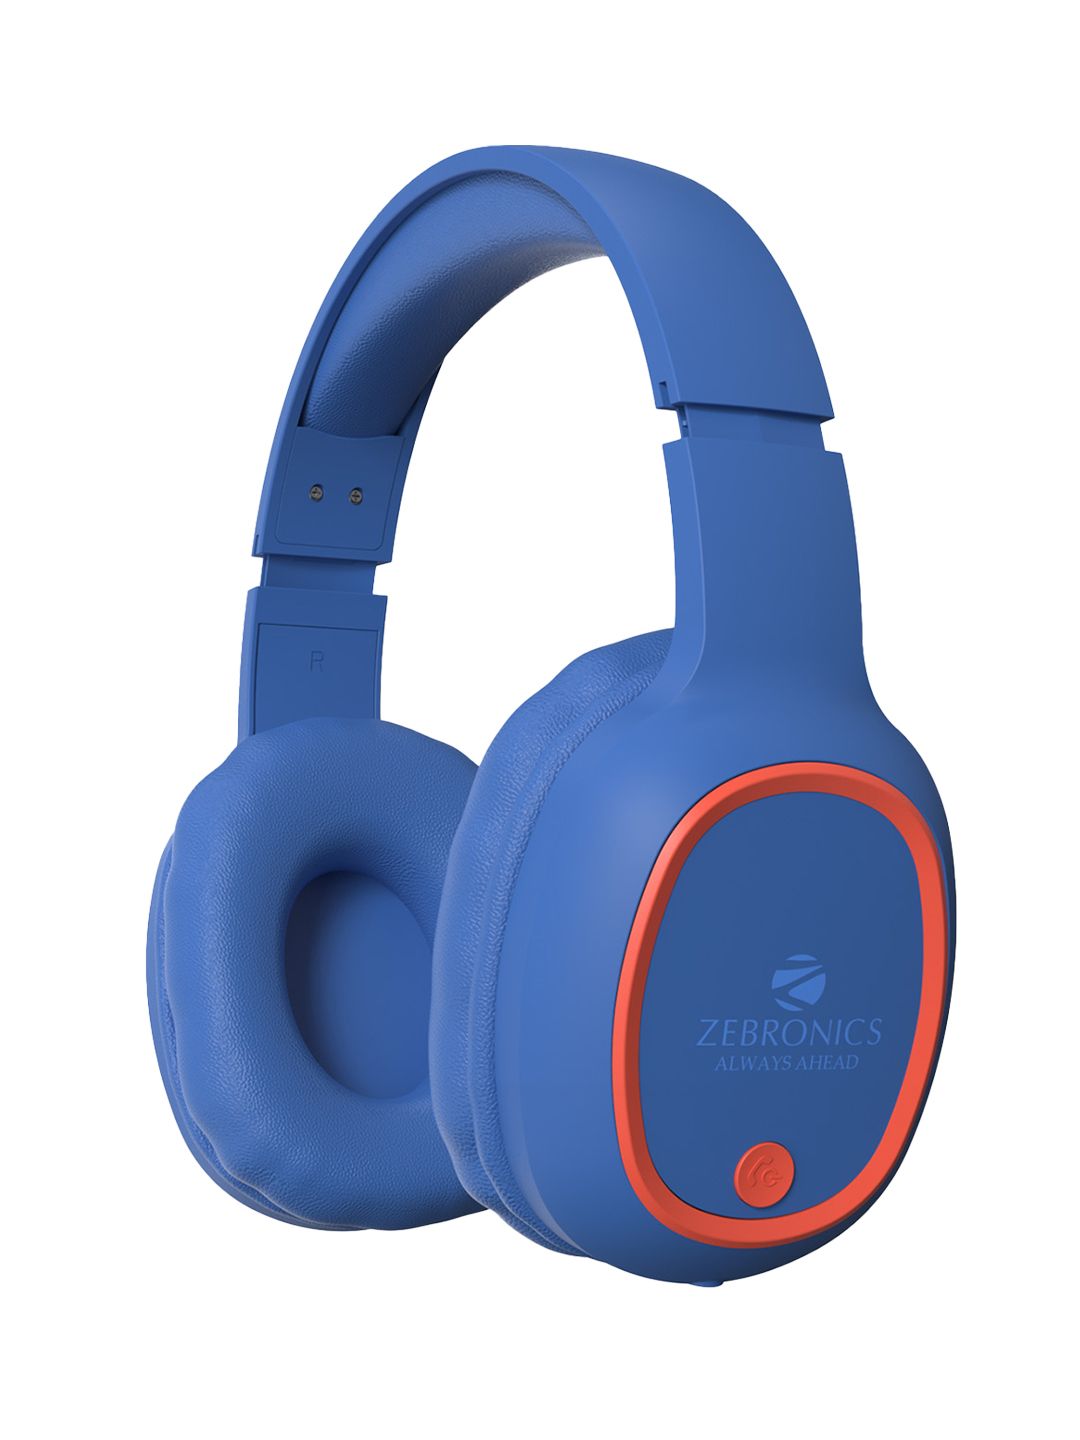 ZEBRONICS Zeb-Thunder Bluetooth Wireless Over The Ear Headphone- Blue & Red Price in India